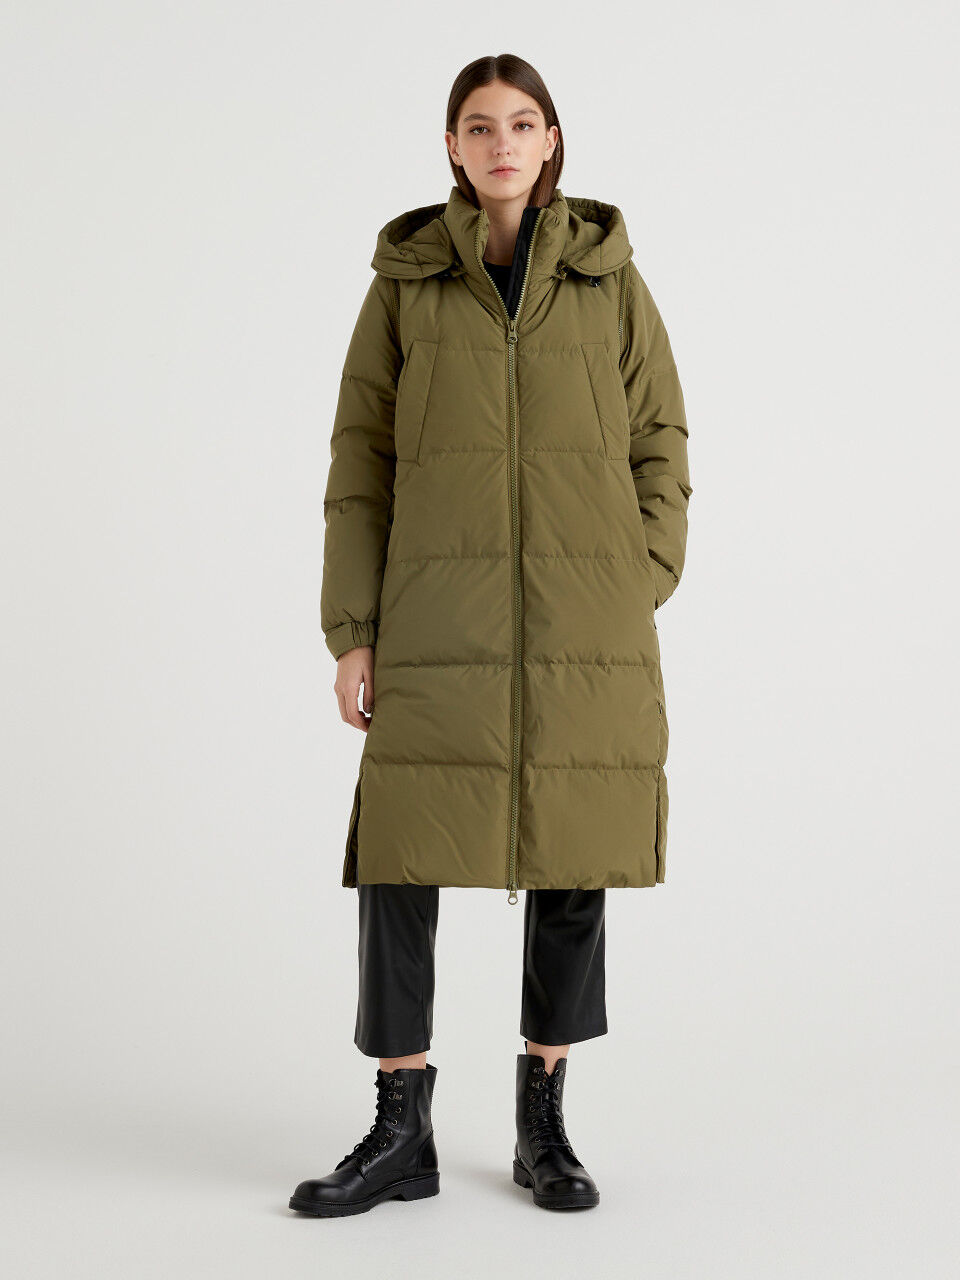 Women's Puffer Jackets New Collection 